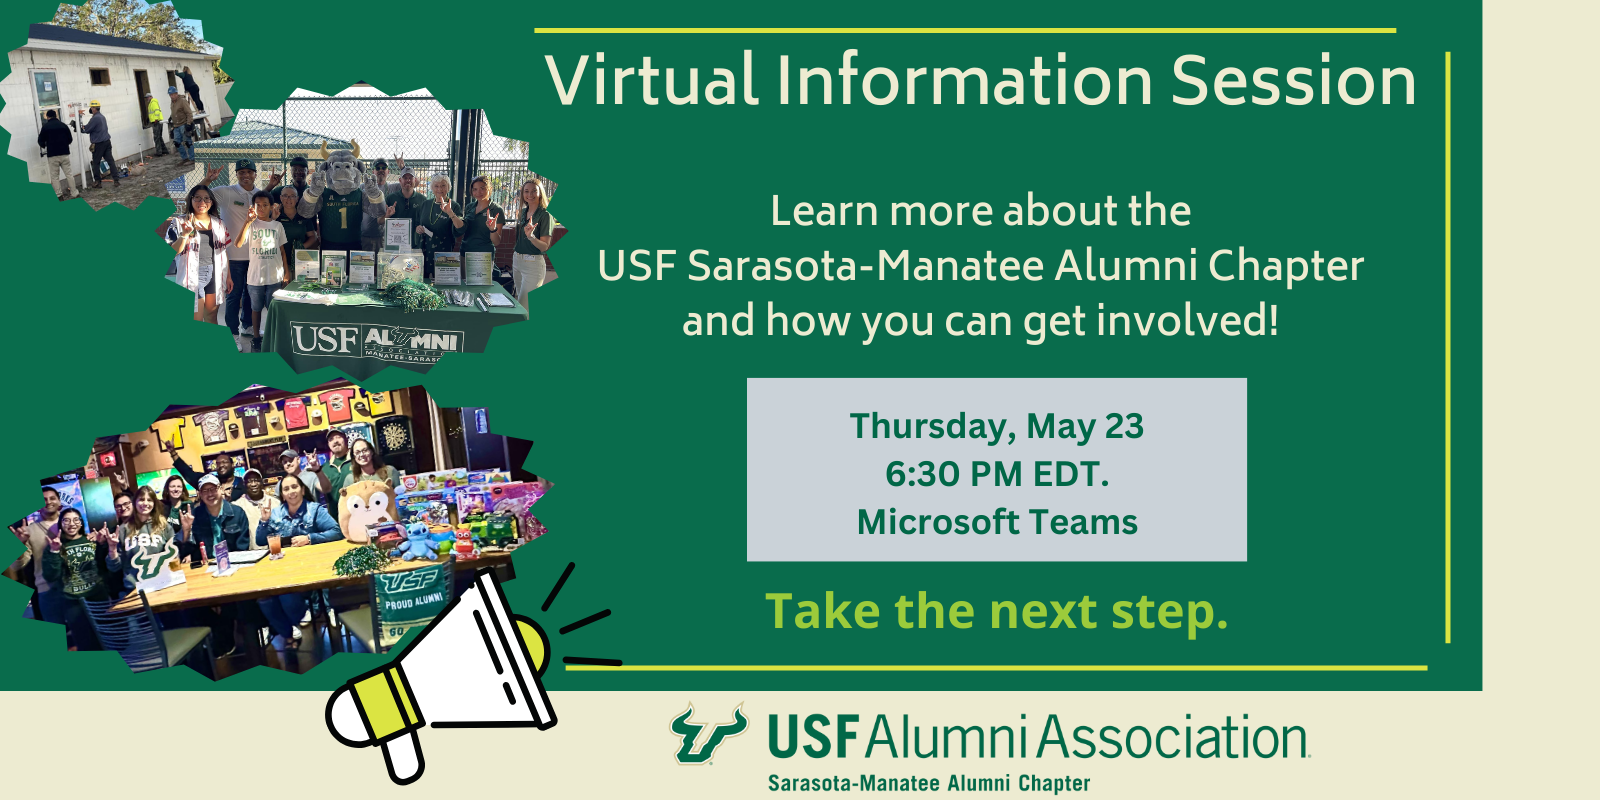 Flyer promoting a virtual interest session for the Sarasota-Manatee Alumni Chapter on May 23 at 6:30pm via Teams